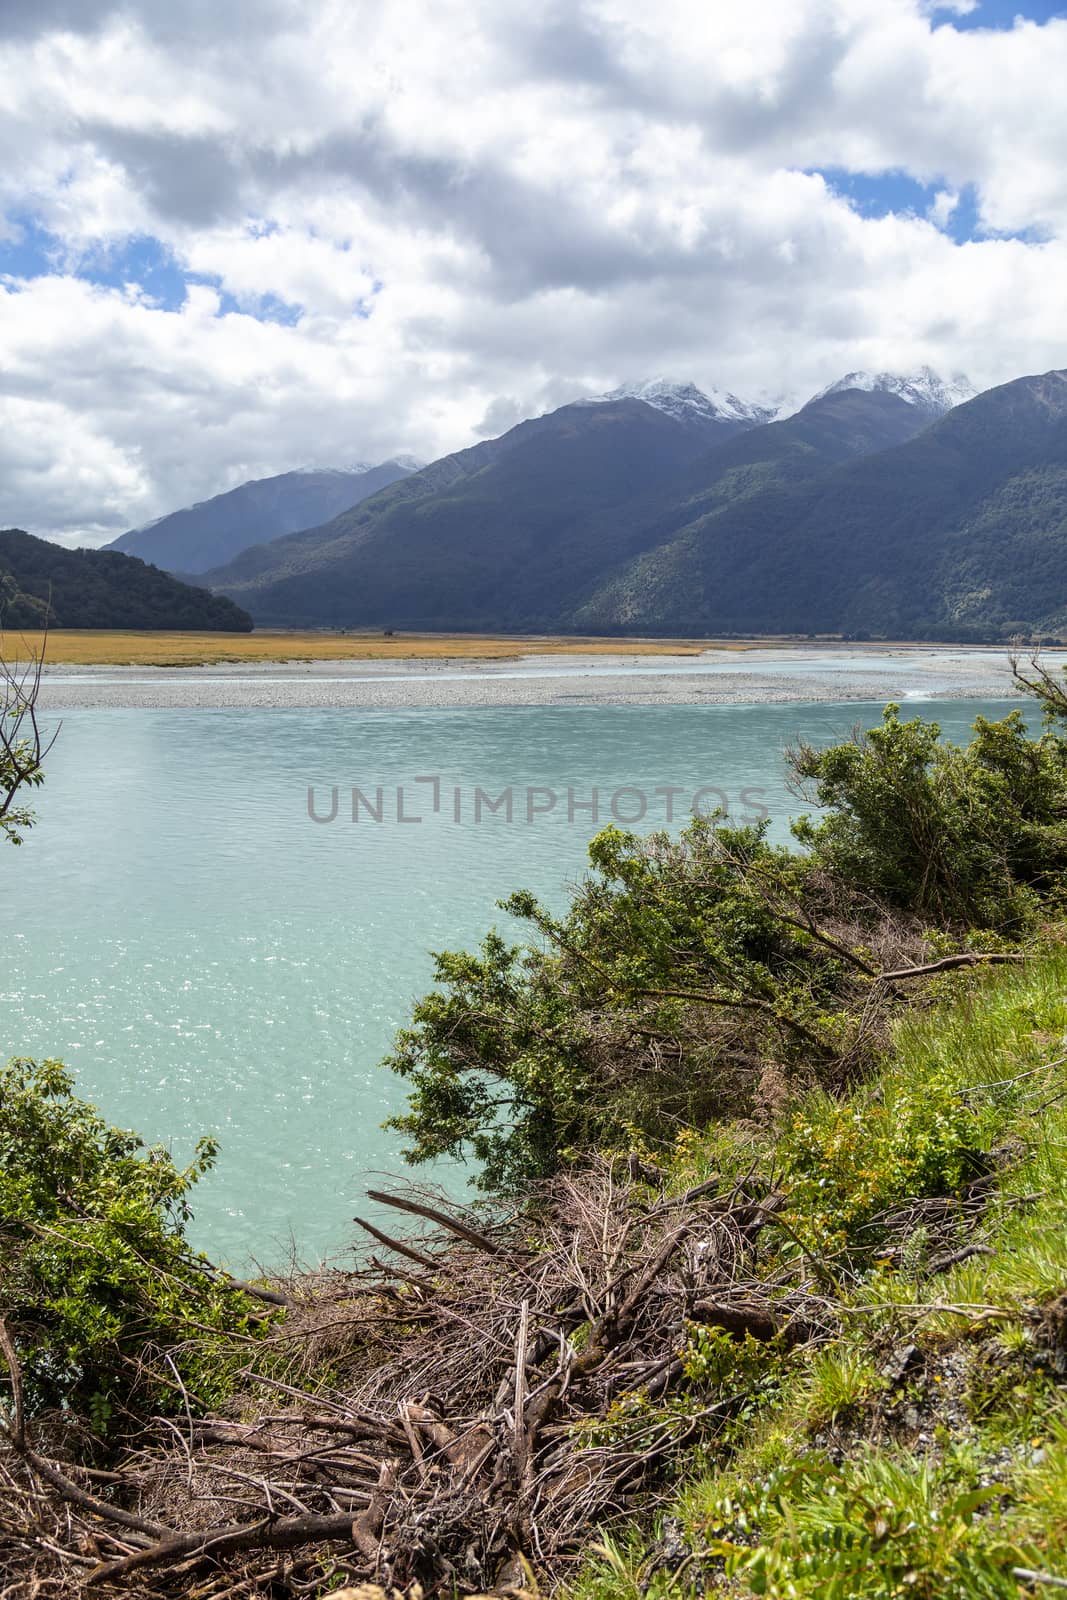 An image of a riverbed landscape scenery in south New Zealand